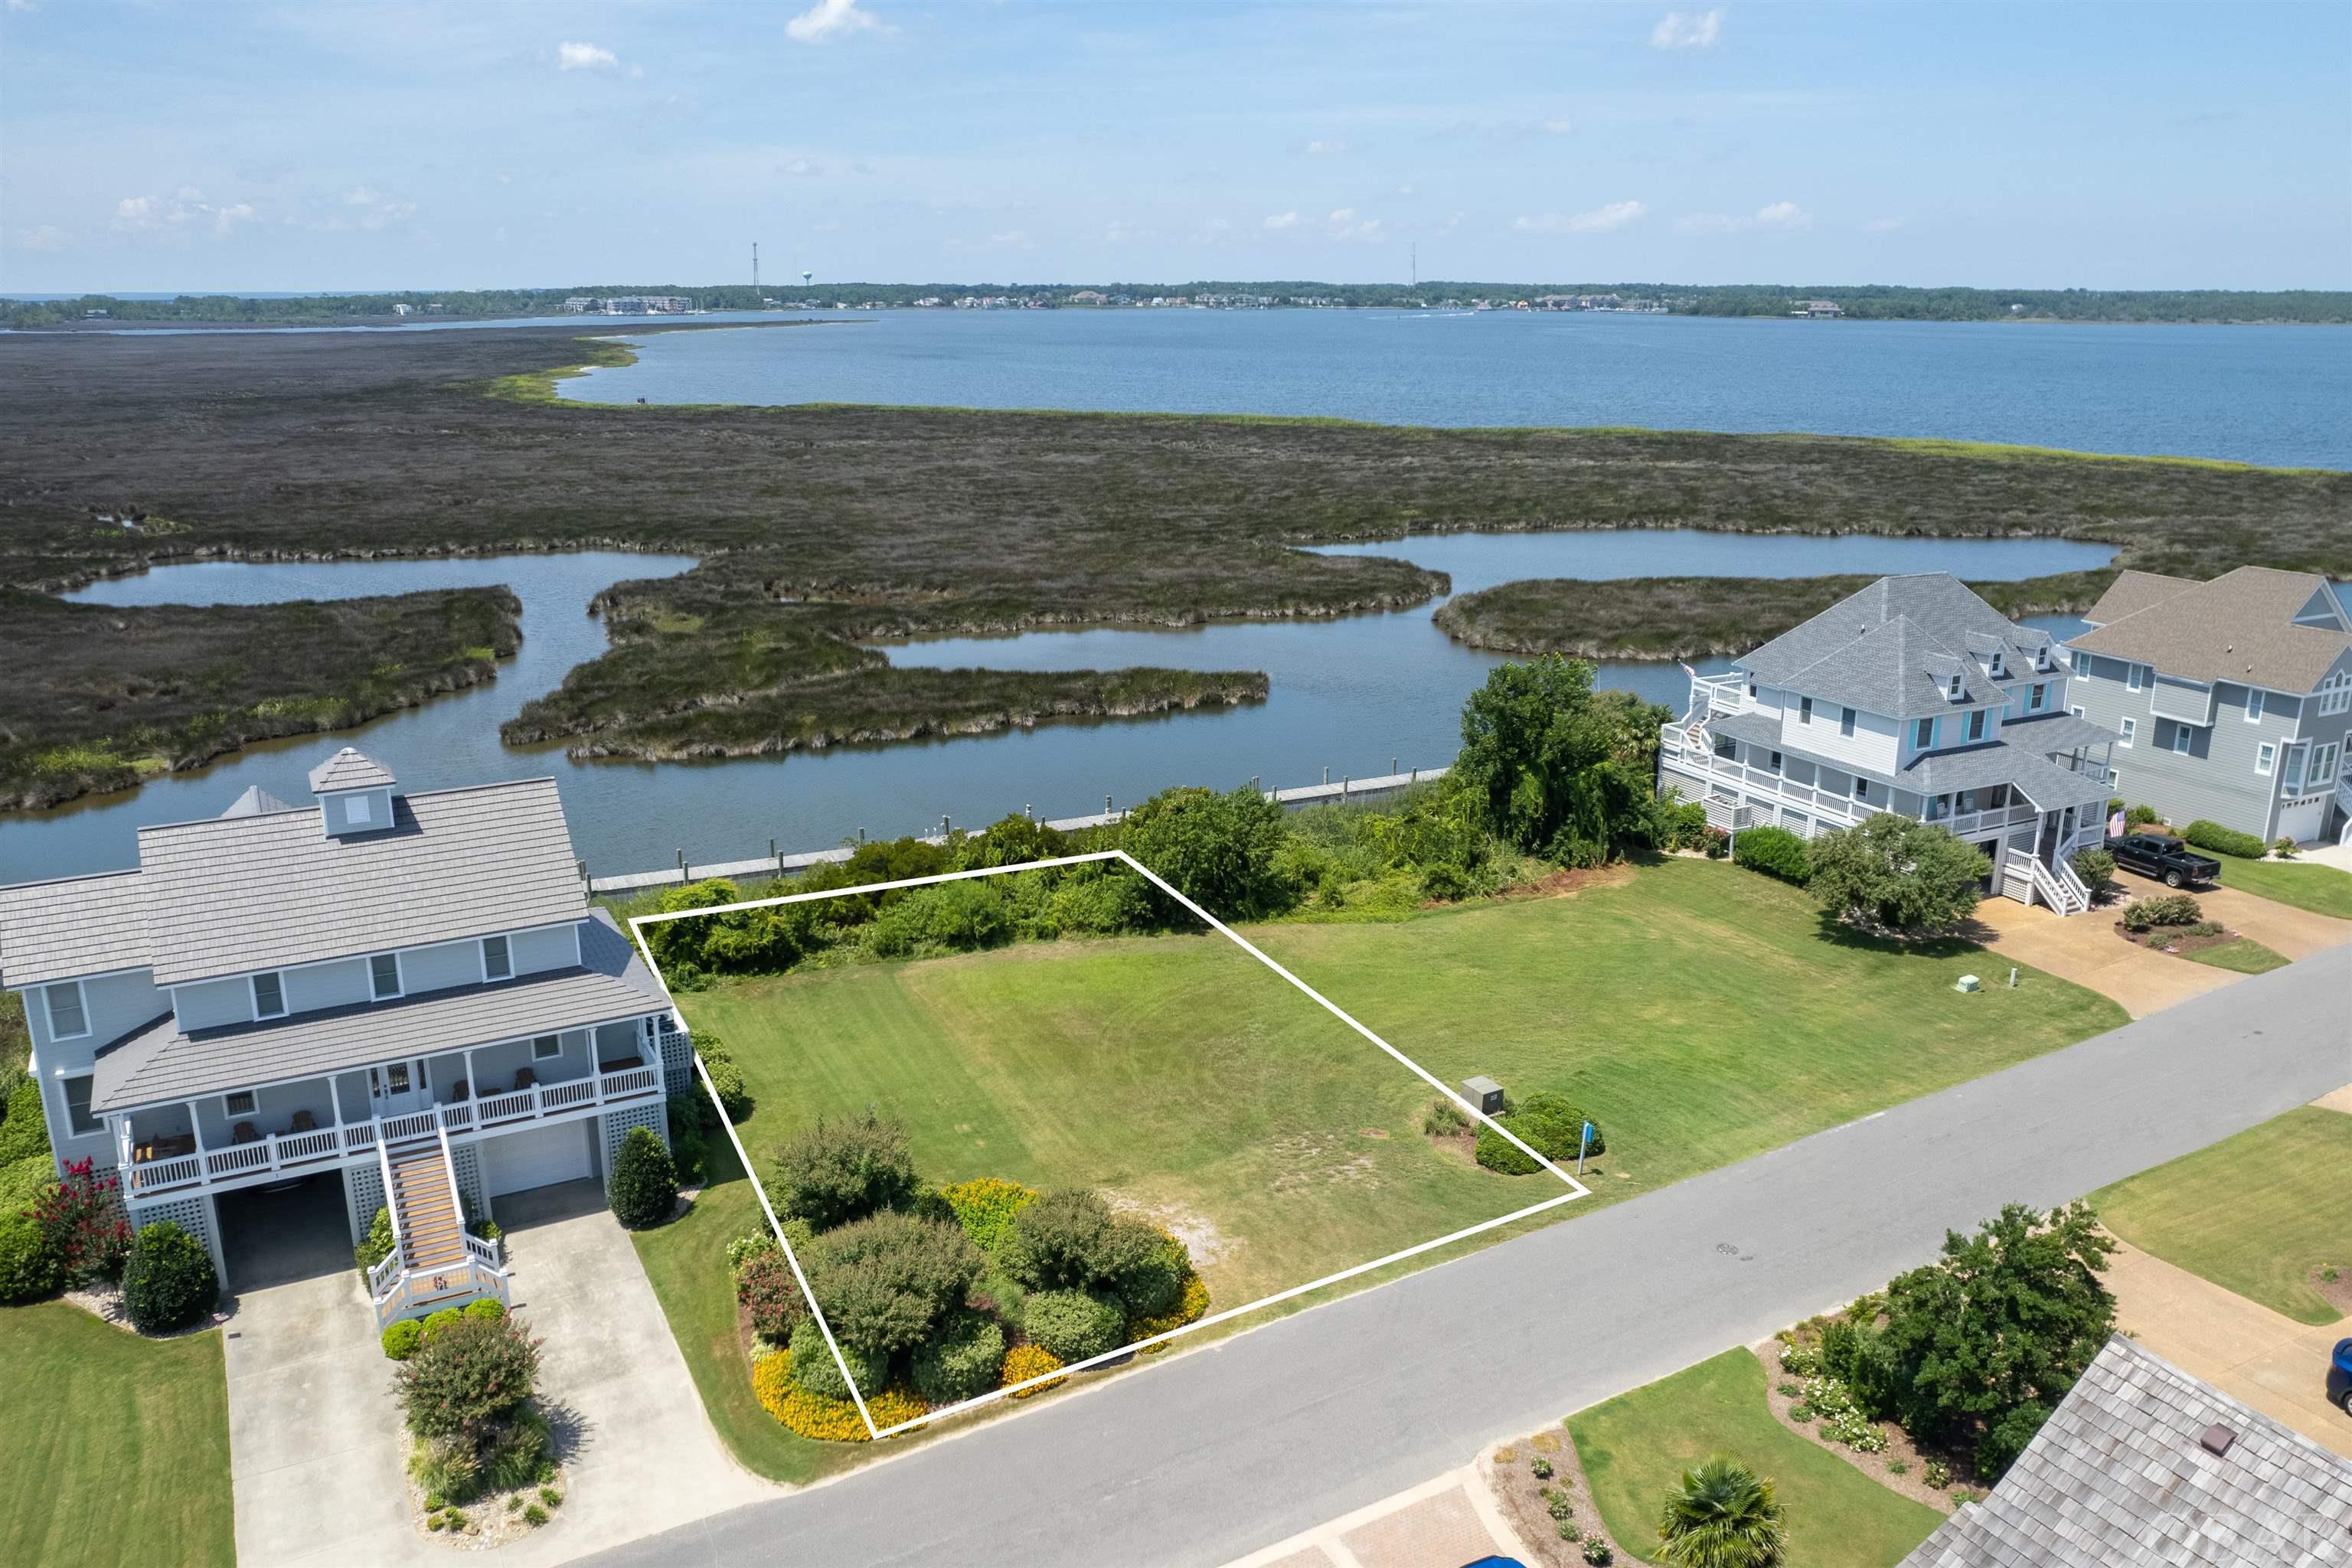 Build your waterfront house on one of the last lots left in Pirate's Cove.  This 11,285 square foot lot showcases beautiful sunsets and is located in the gated community of Pirate's Cove and conveys a 35FT boat dock (slip 43) assigned by the HOA . Community amenities include: the Pirate's Cove Fishing Marina, two swimming pools, clubhouse, tennis courts, fitness center, playground, commons area, on-site restaurant with Tiki Bar and 4 miles of perimeter docking perfect for walking or fishing.  Seller in the associated docs.